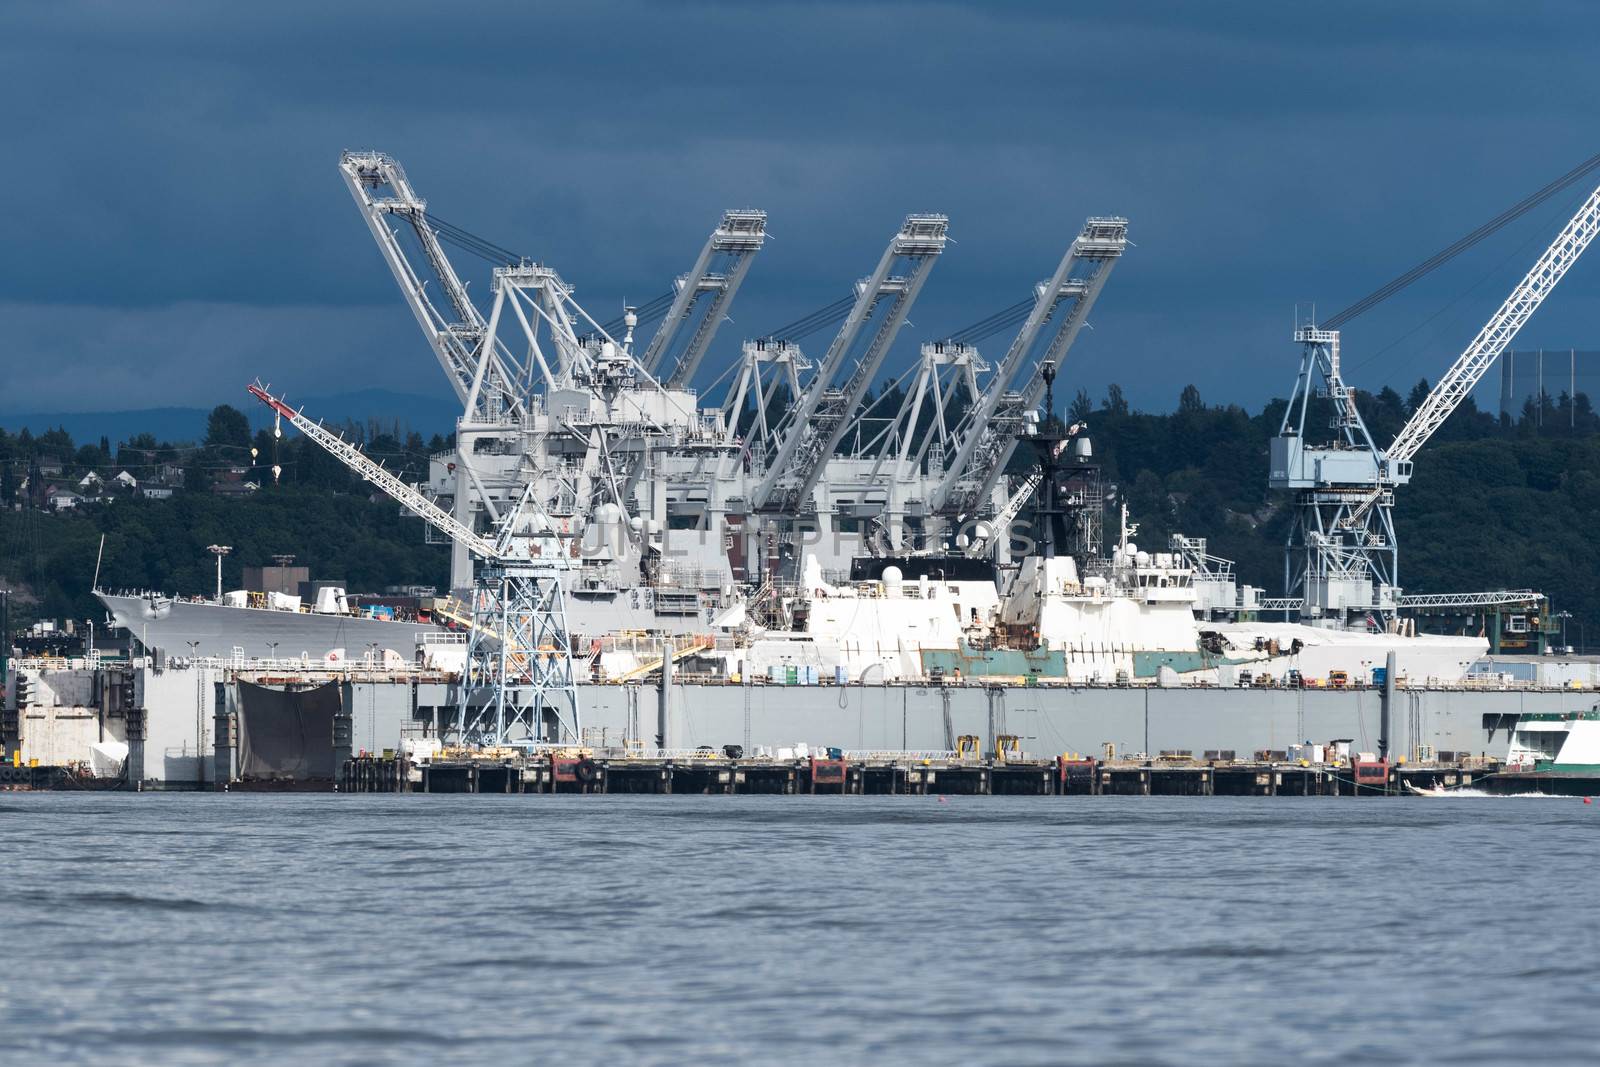 US Navy ship and US Coast Guard ships being worked on at Seattle's  largest shipayard on cloudy day with bright sunlight.